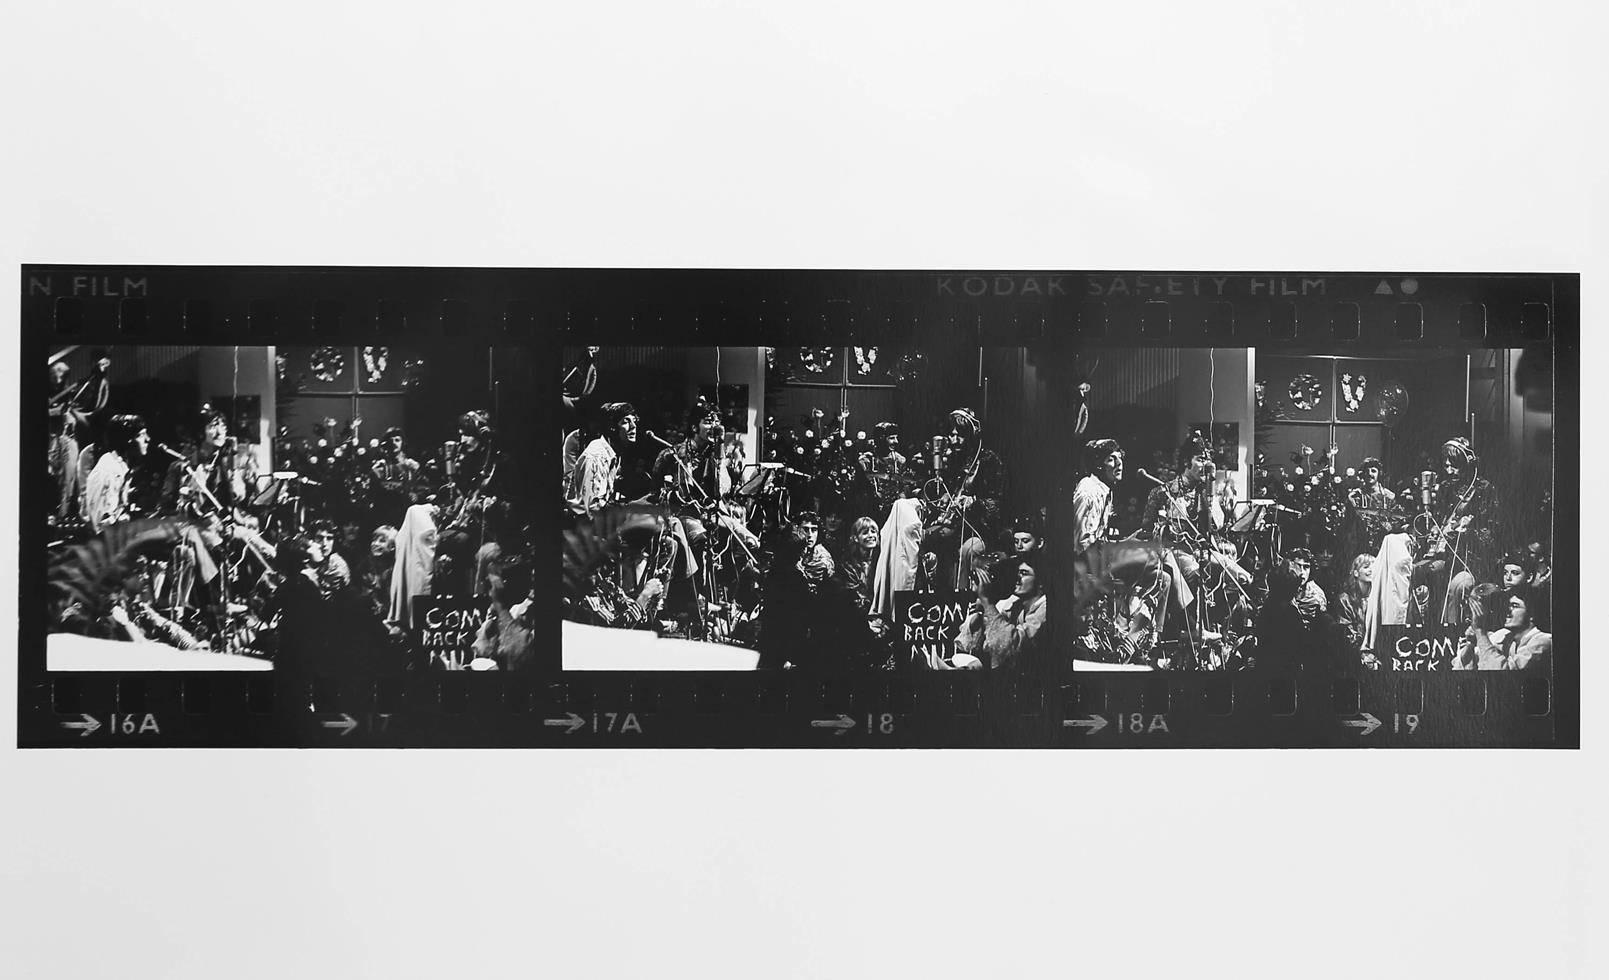 David Mangus Black and White Photograph - The Beatles, Live Broadcast Contact Sheet, London, 1967